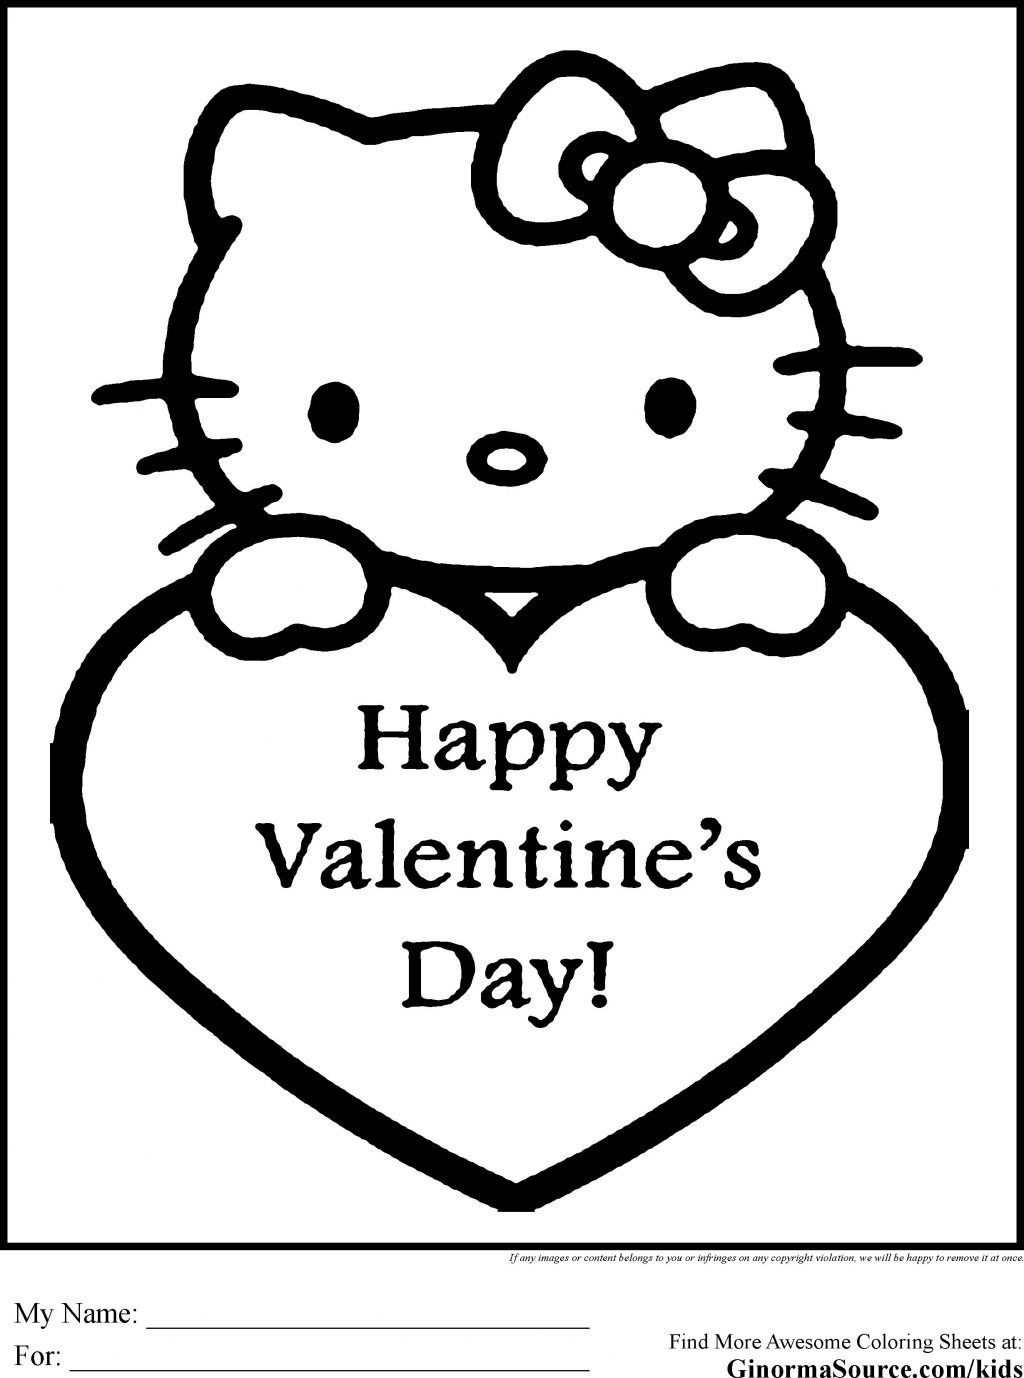 Coloring Pages ~ Coloring Pages Free Valentine For Kidsable Disney - Free Printable Disney Valentine Coloring Pages